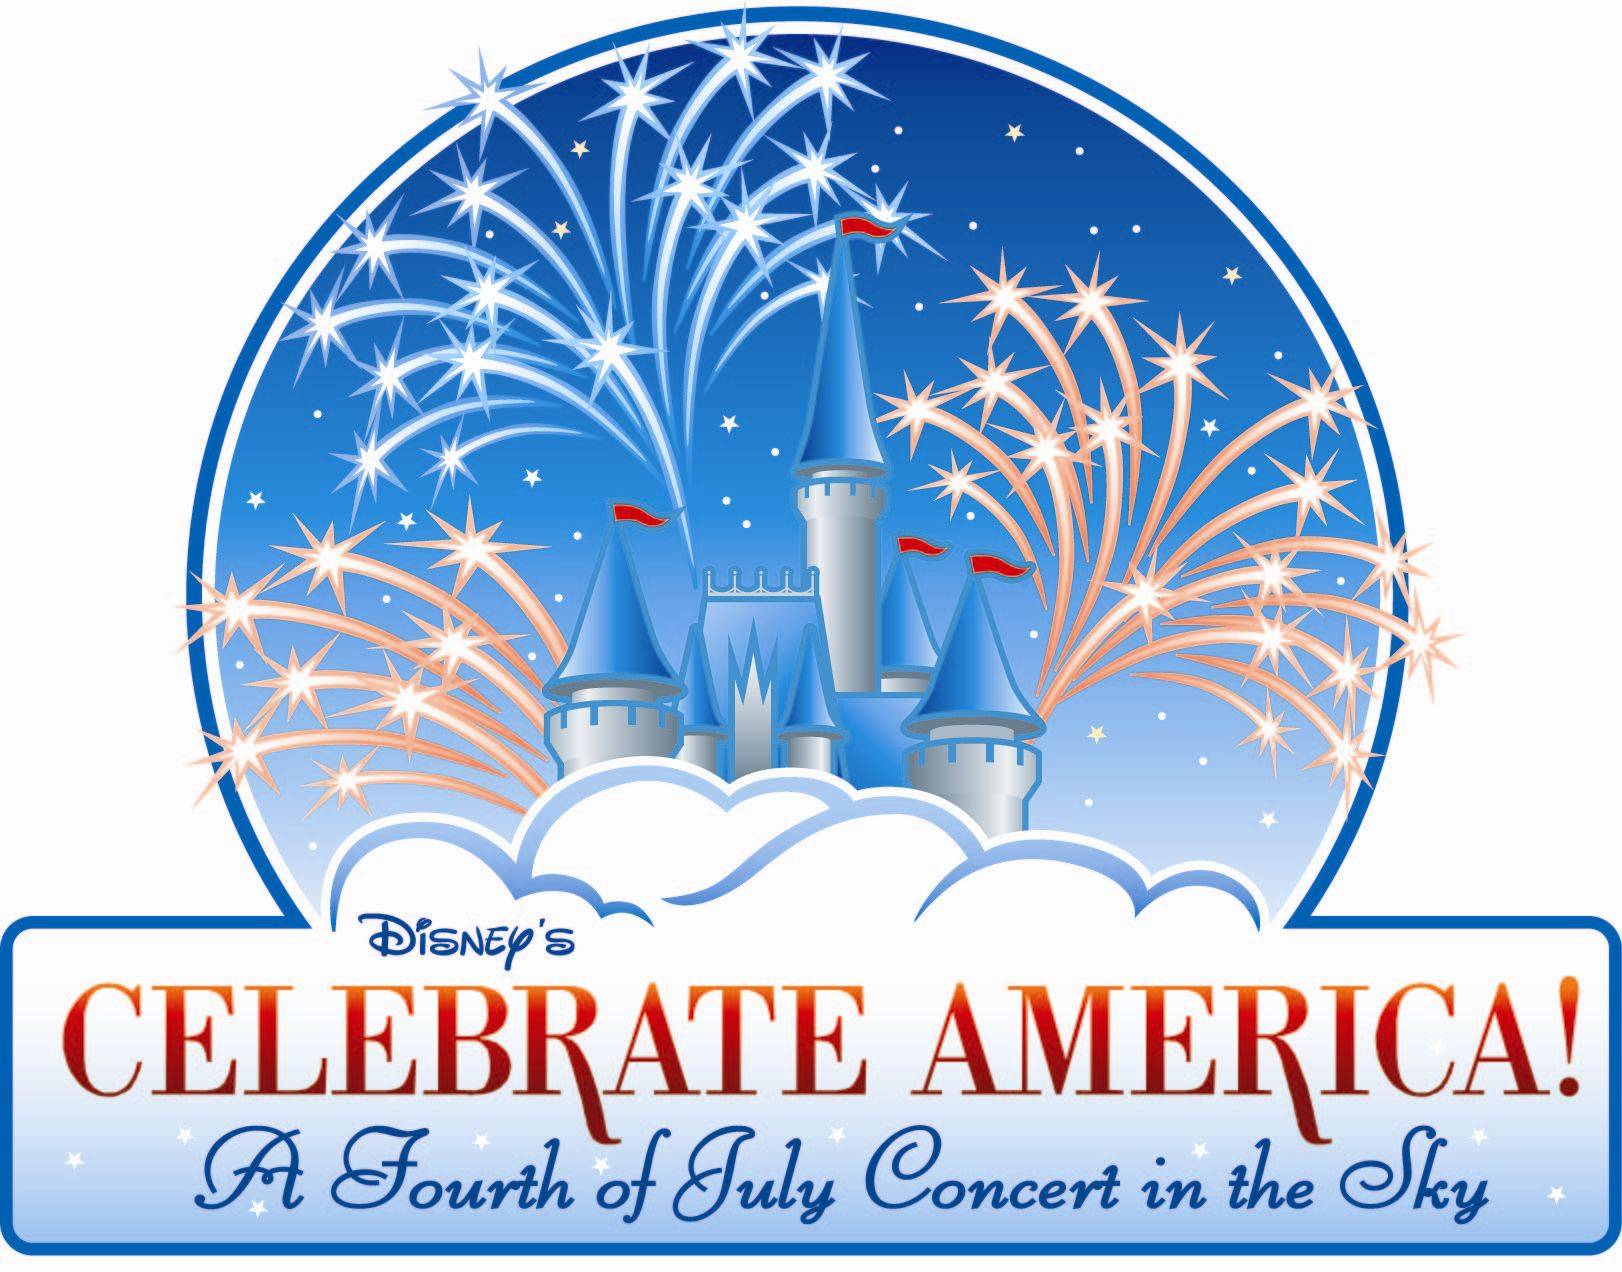 Disney's Celebrate America! - A Fourth of July Concert in the Sky logo. Copyright 2009 The Walt Disney Company.